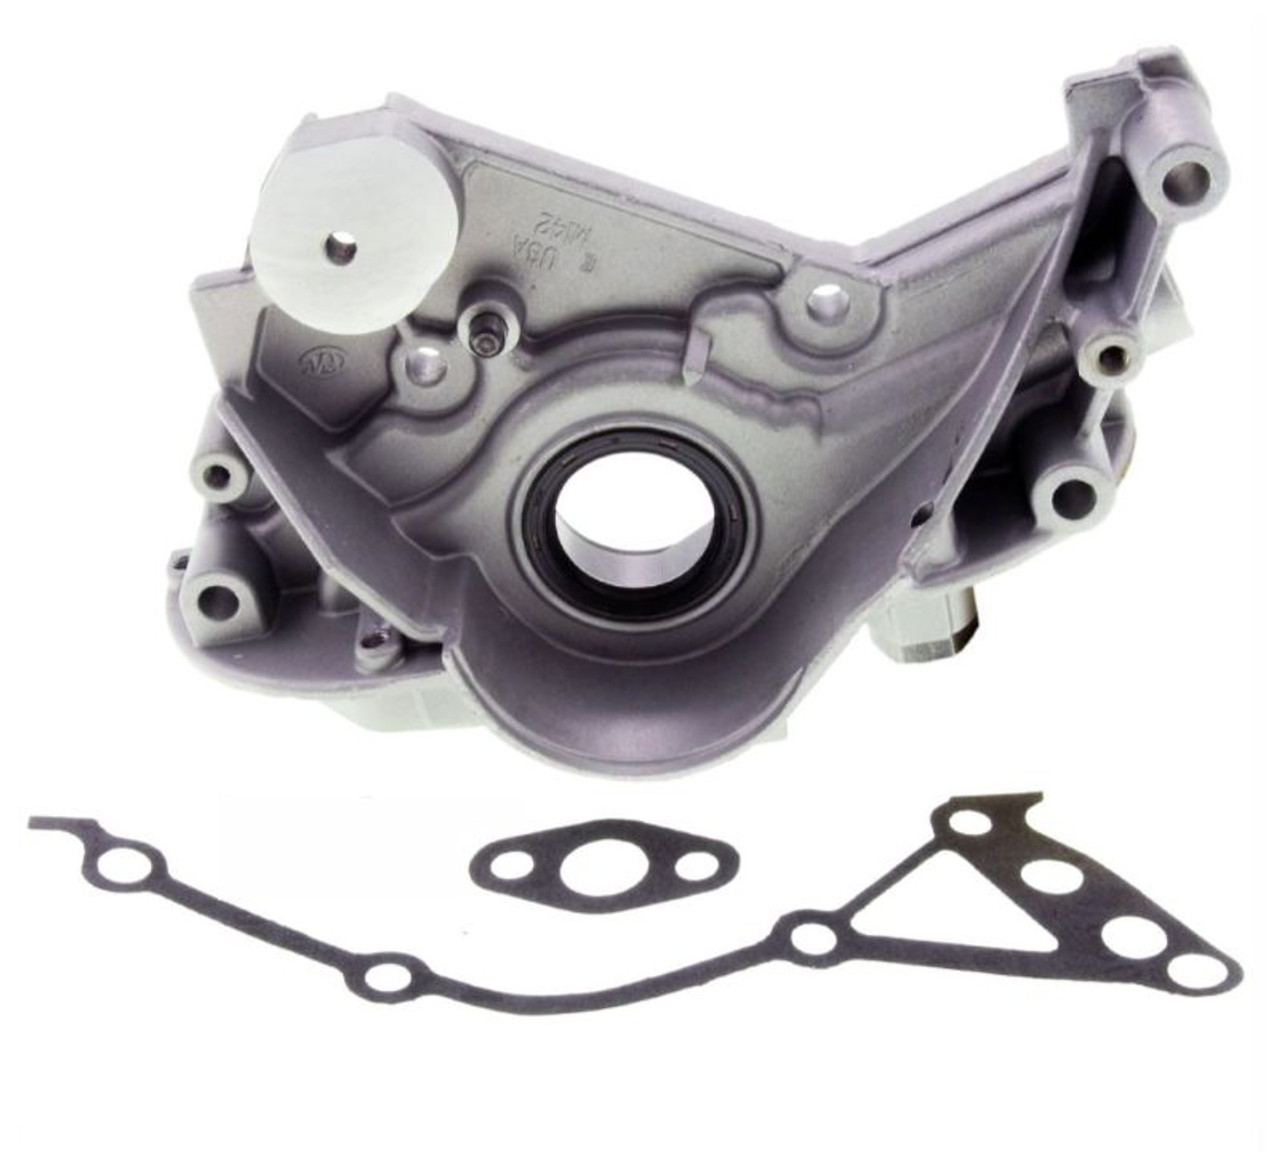 Oil Pump - 1992 Plymouth Grand Voyager 3.0L (EP142.E46)